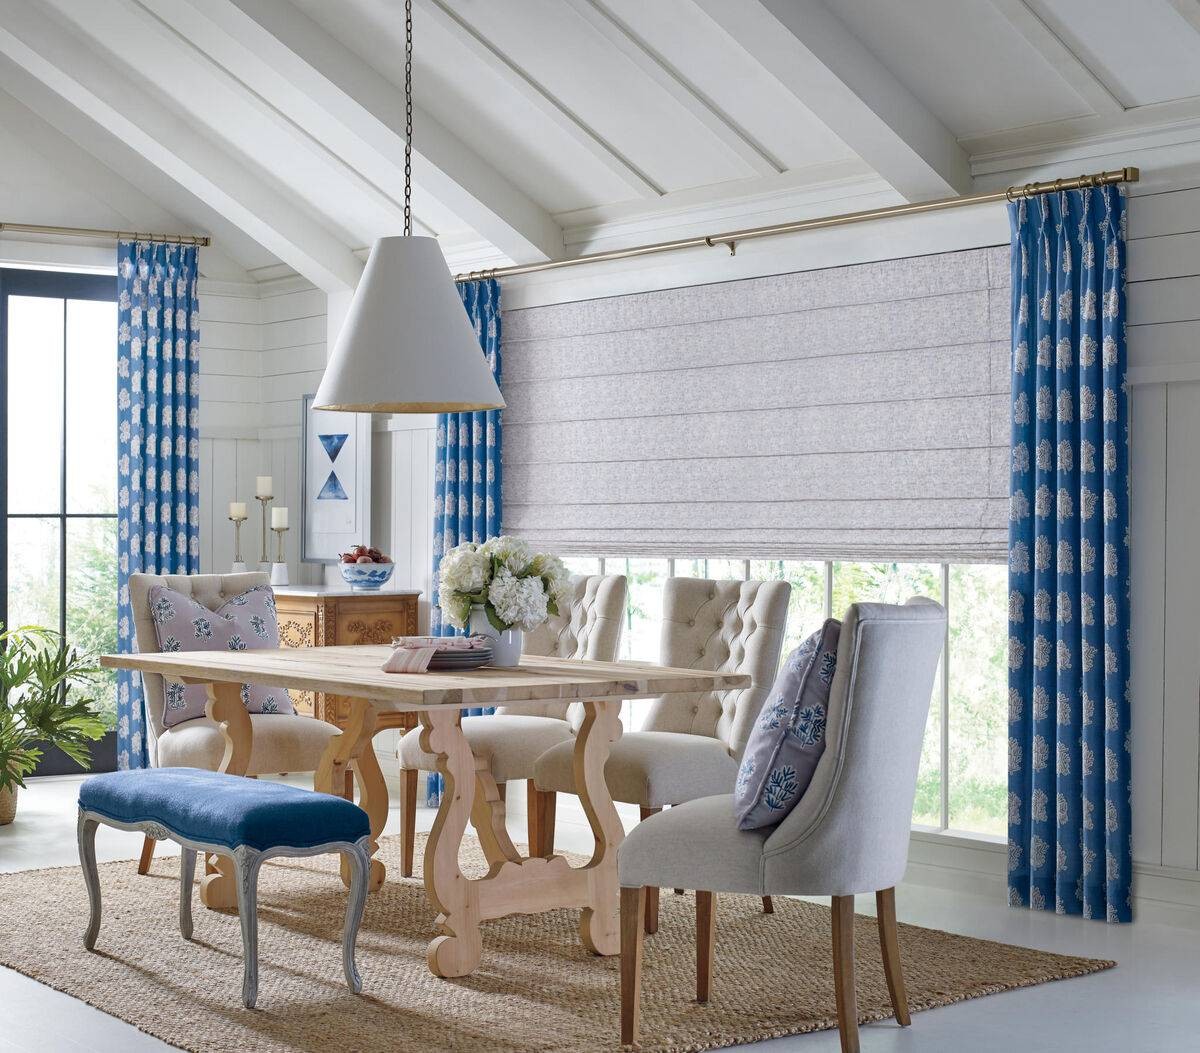 Hunter Douglas Roman Shades layered with curtains in a home near Marriottsville, MD